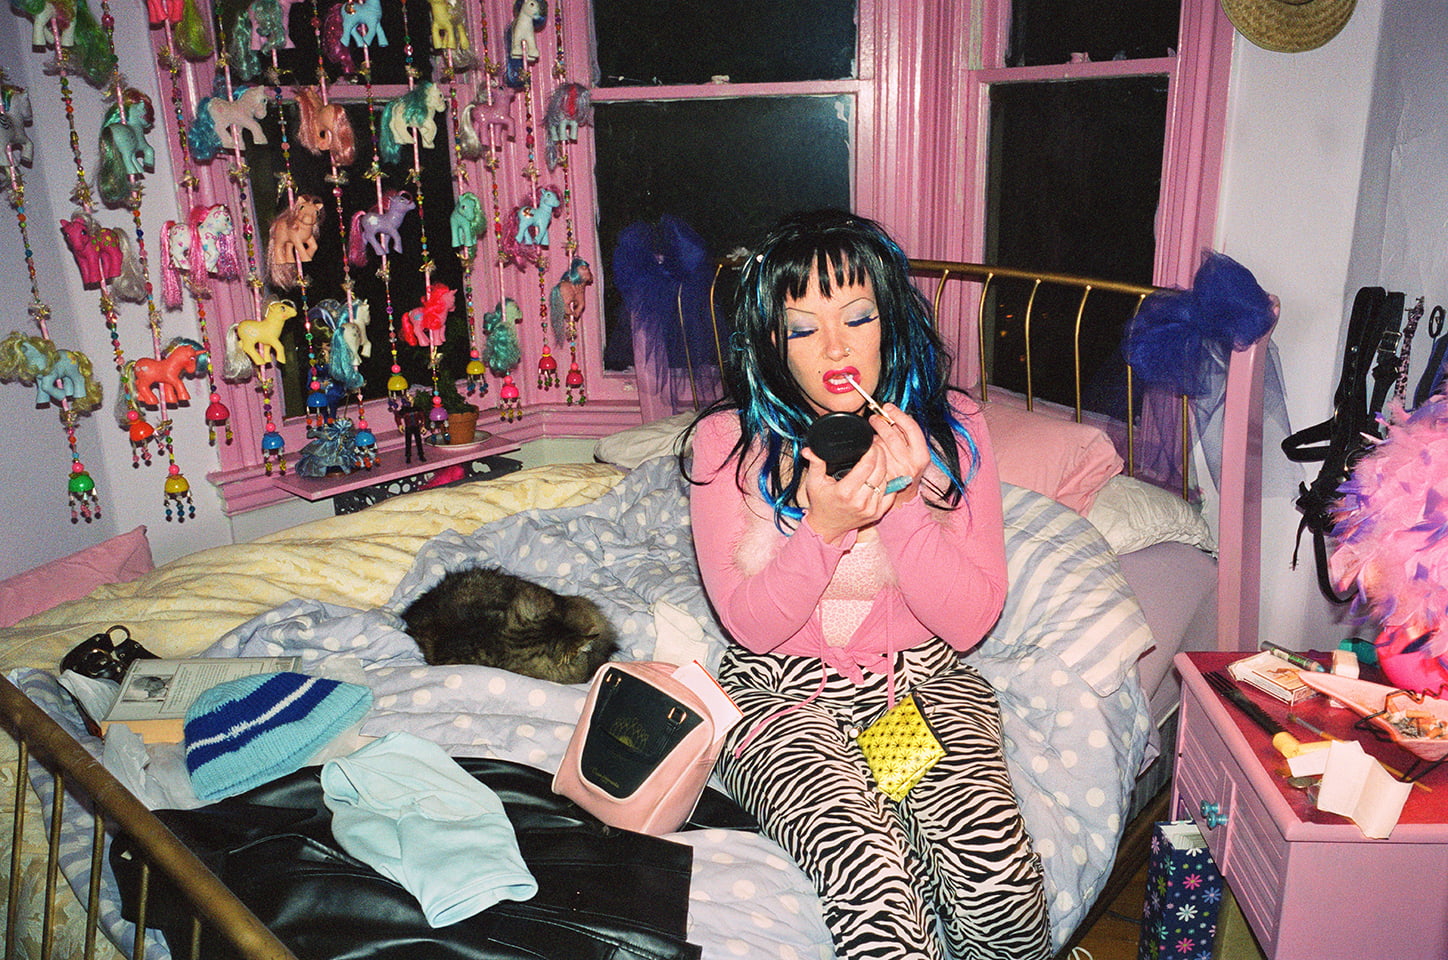 A person with blue hair, a pink top an zebra print pants sits in a busy bedroom. The window frames are painted pink and a beaded curtain incorporating My Little Pony toys hangs behind them.